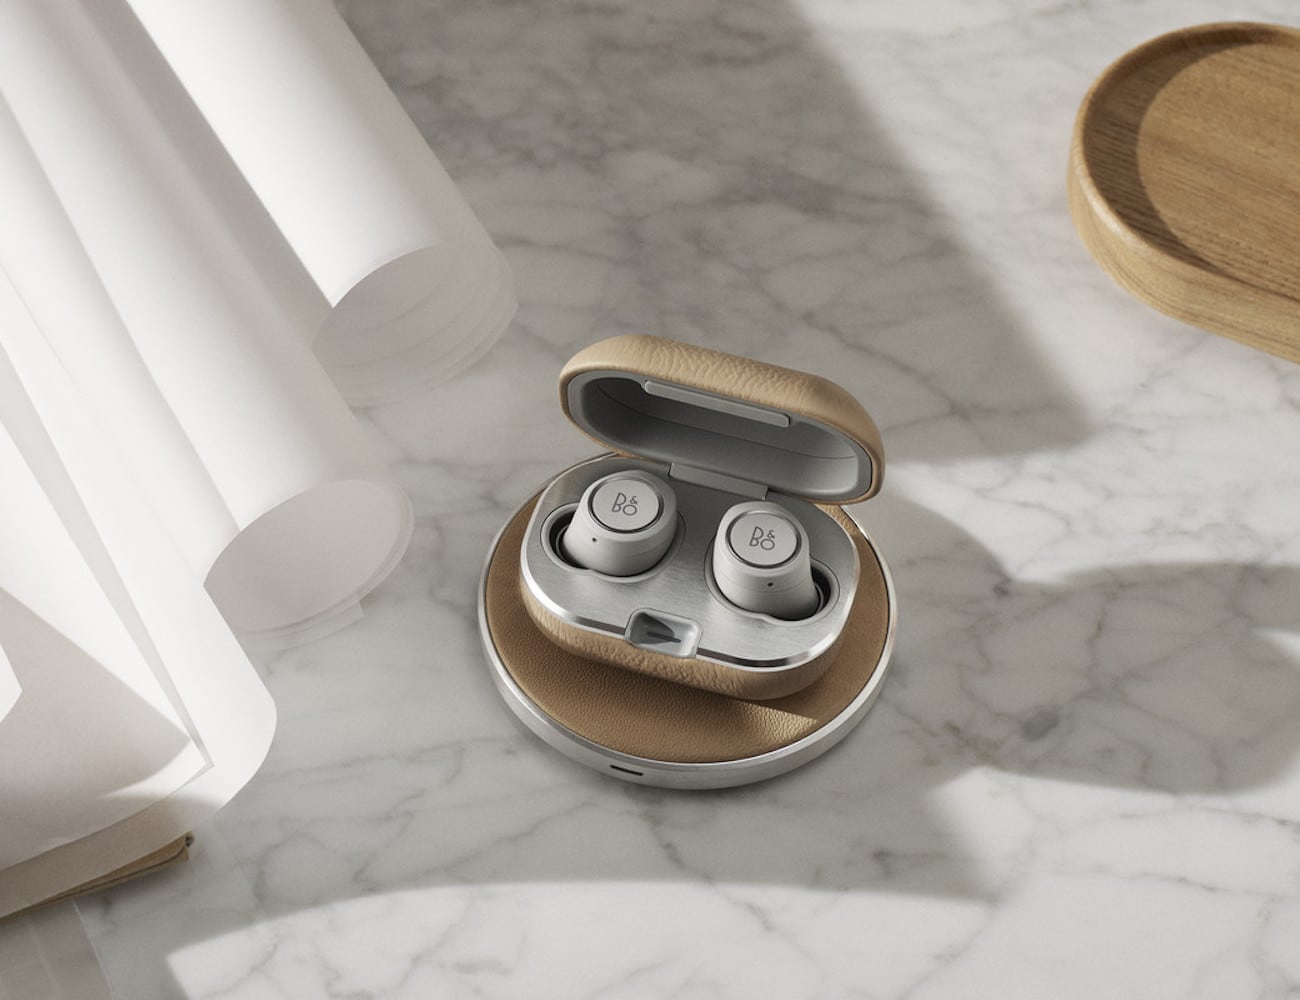 Bang & Olufsen Beoplay E8s 2.0 Wireless Earbuds